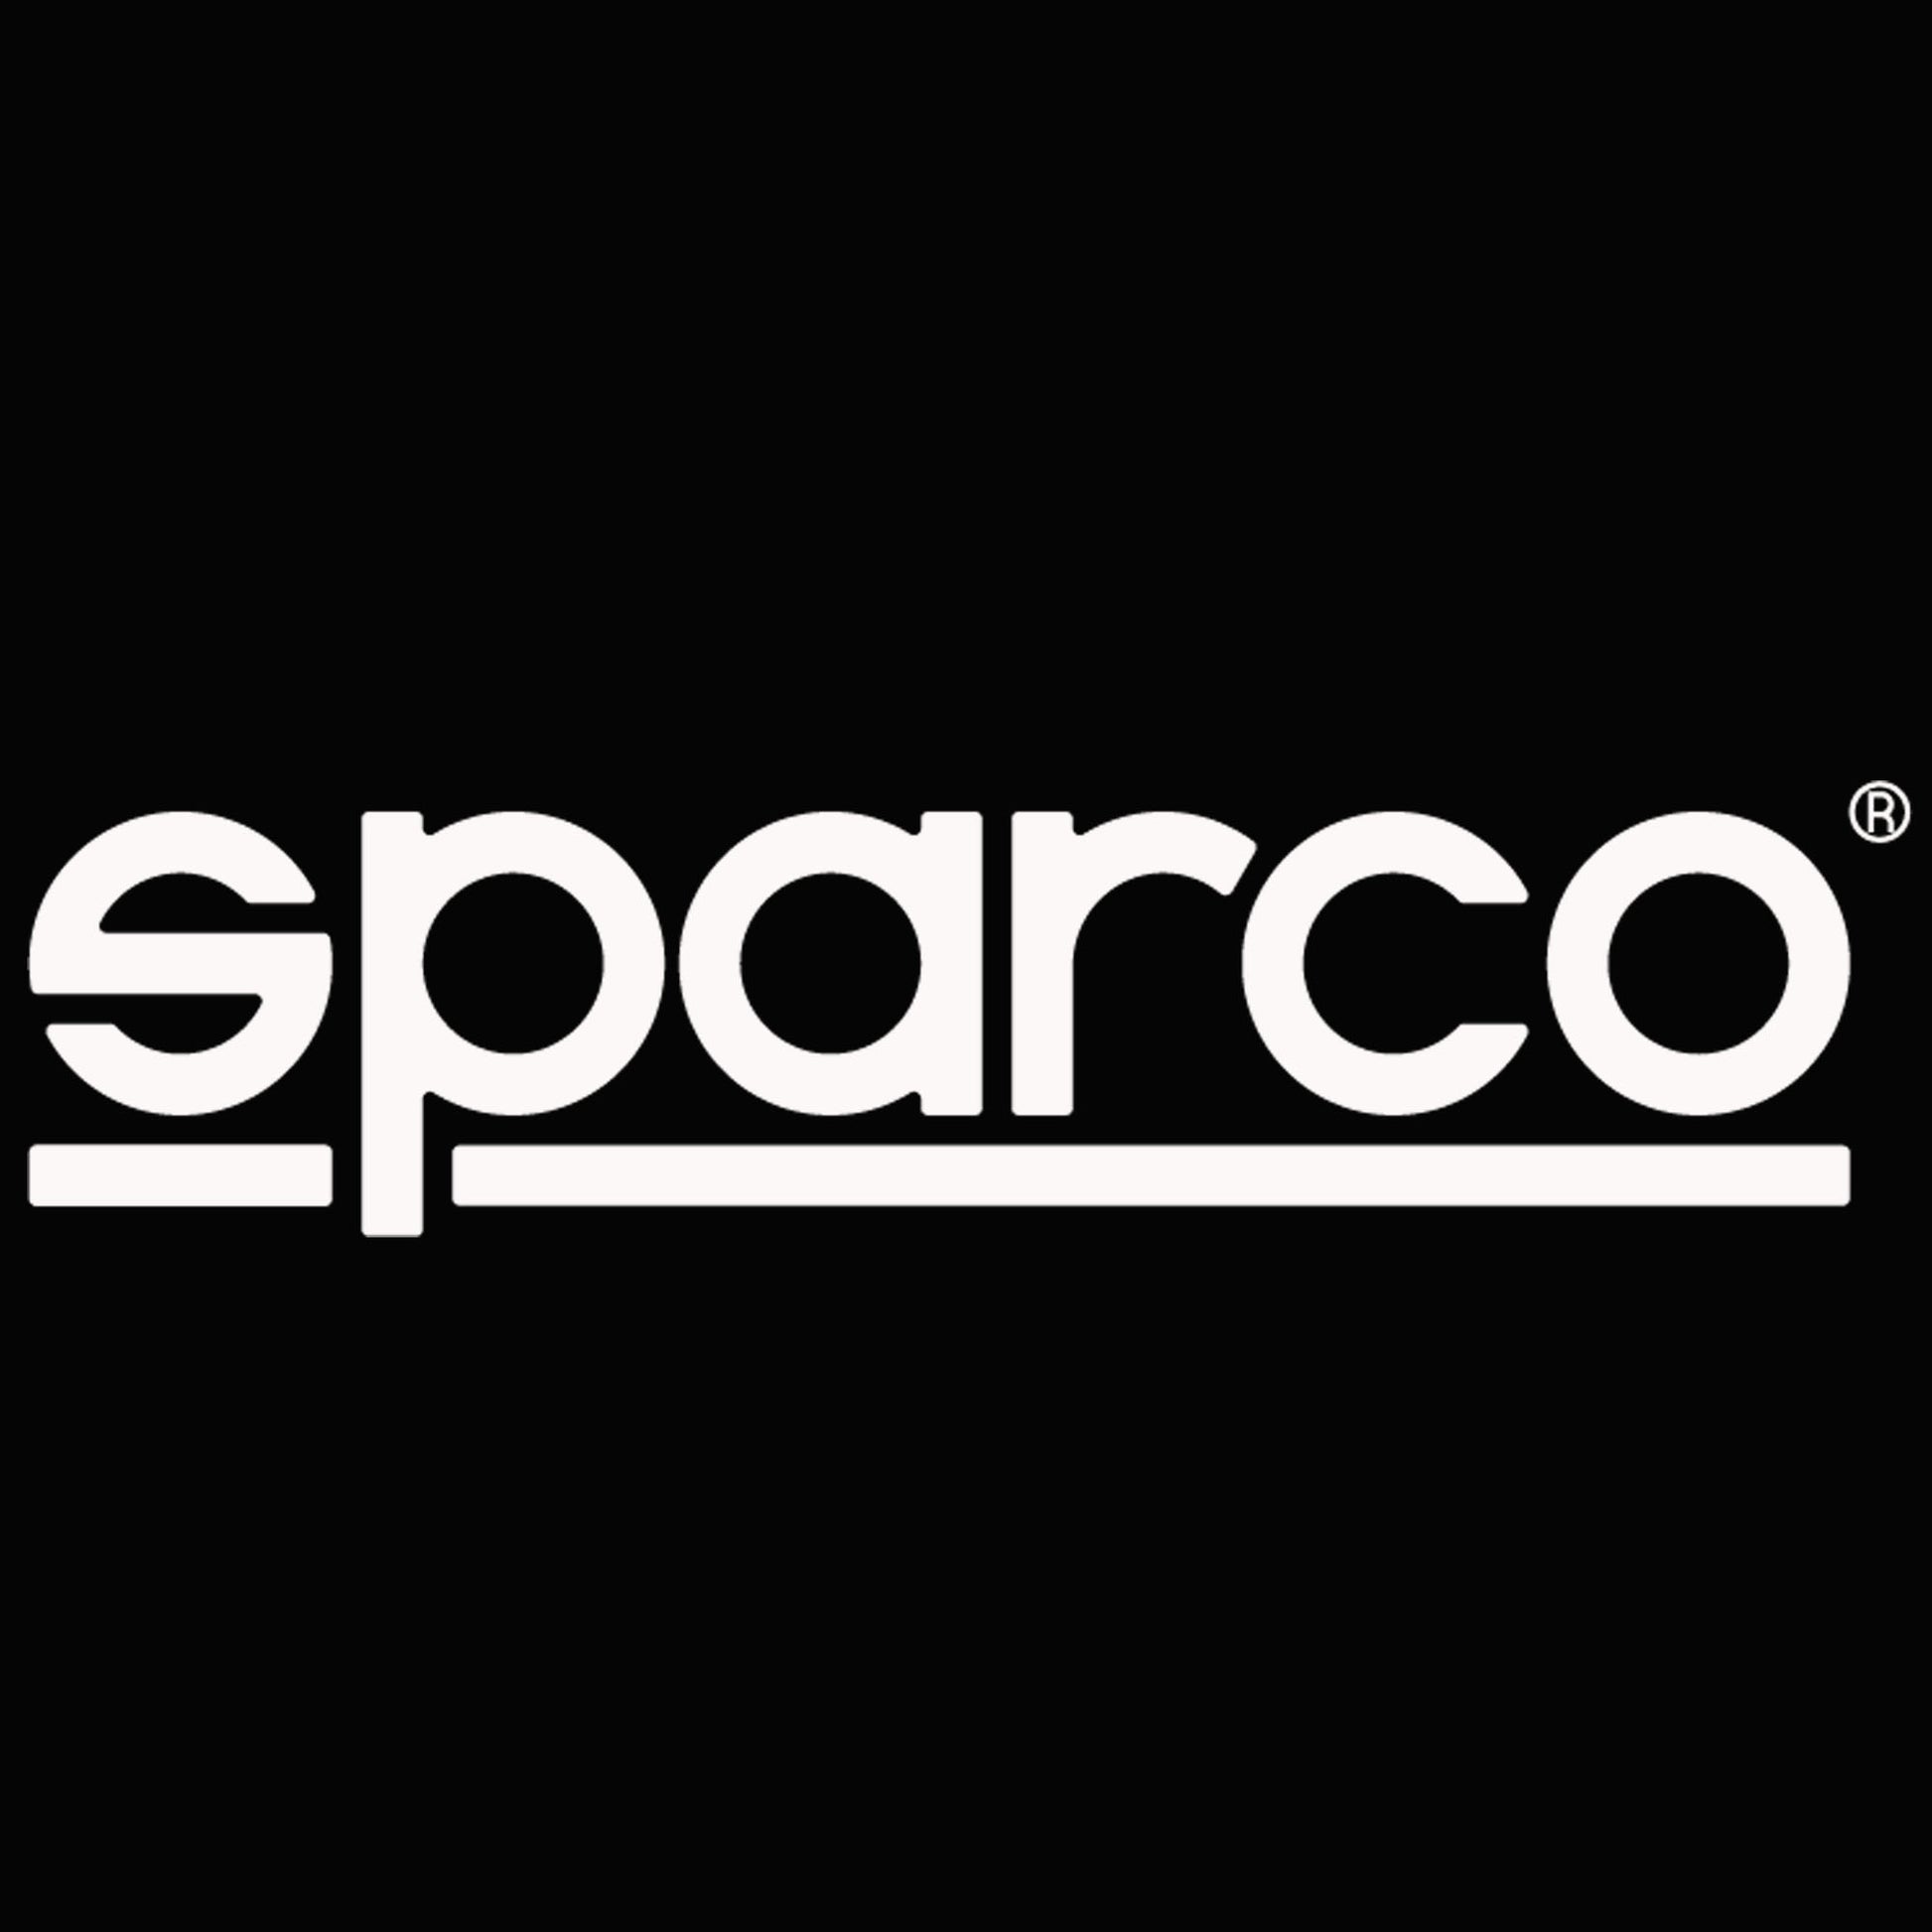 002555 Sparco Record Karting Gloves